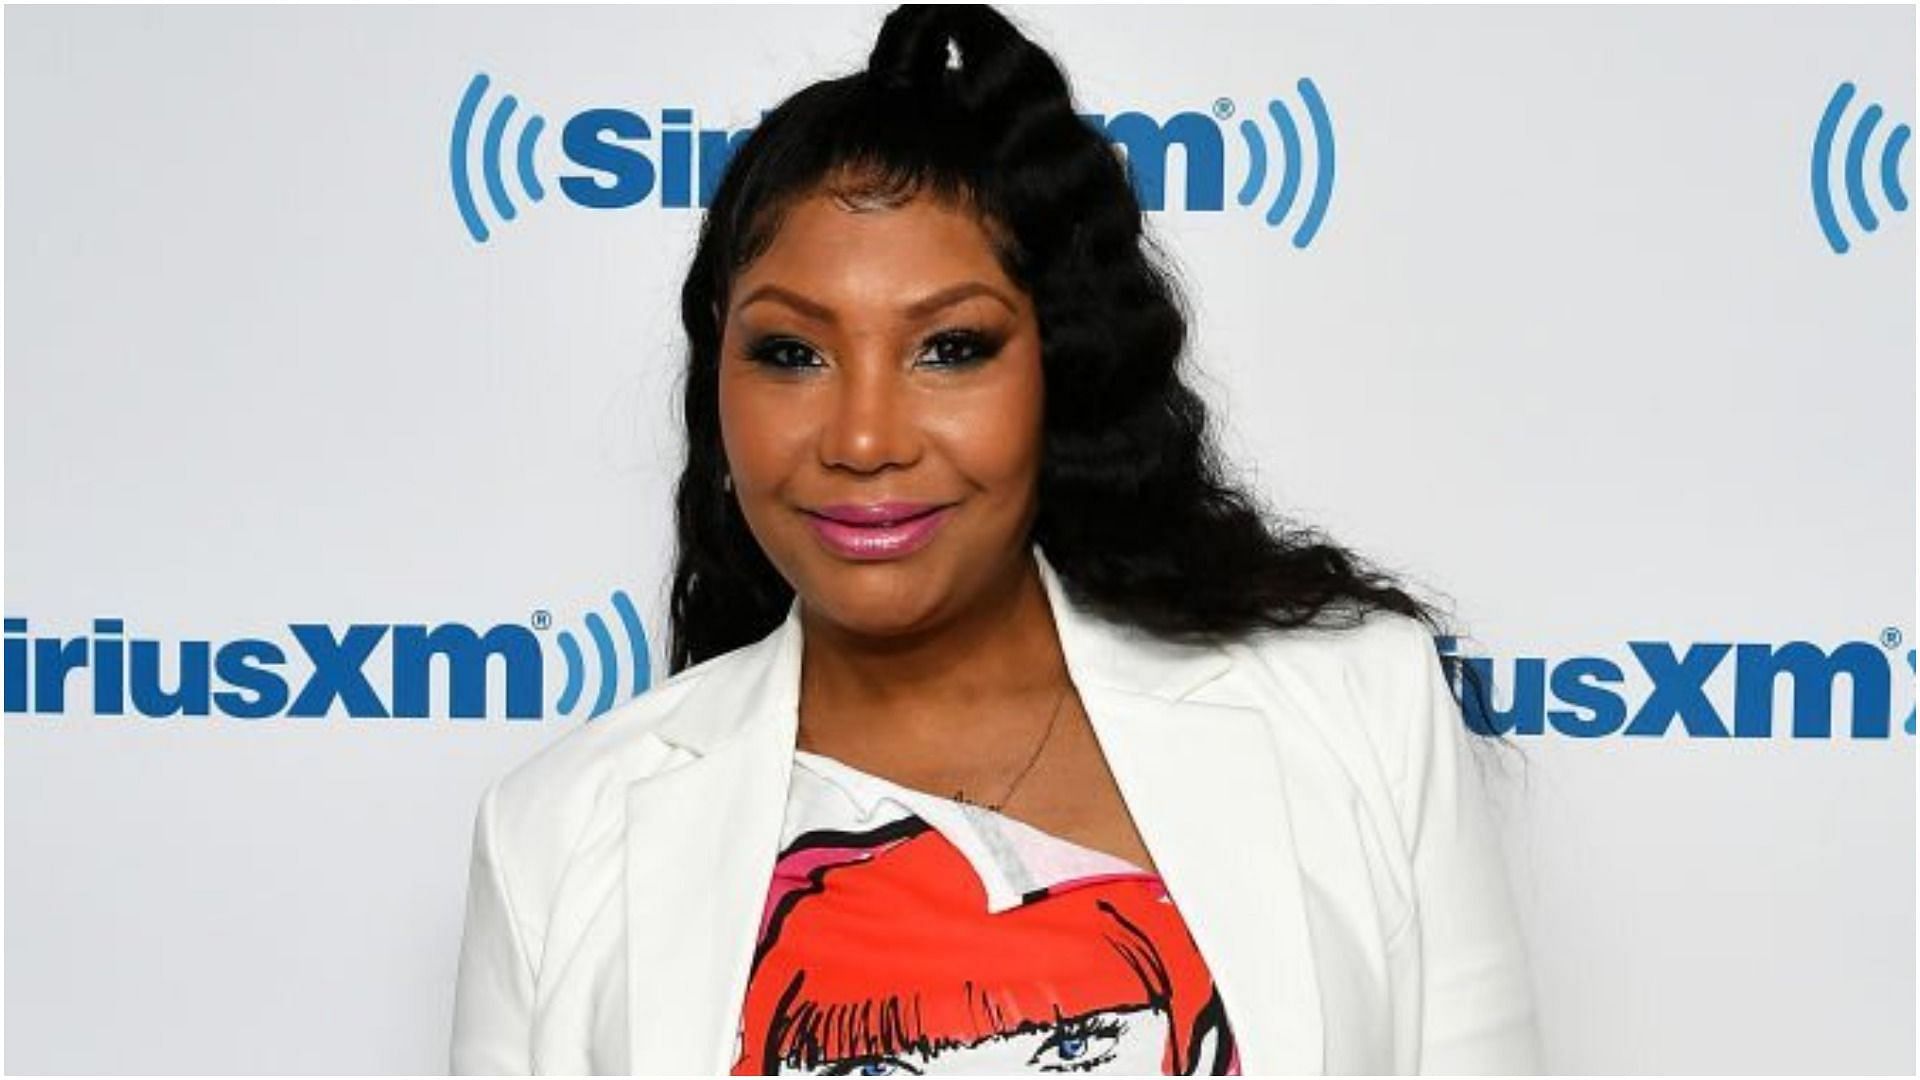 Traci Braxton recently died at the age of 50 (Image via Slaven Vlasic/Getty Images)